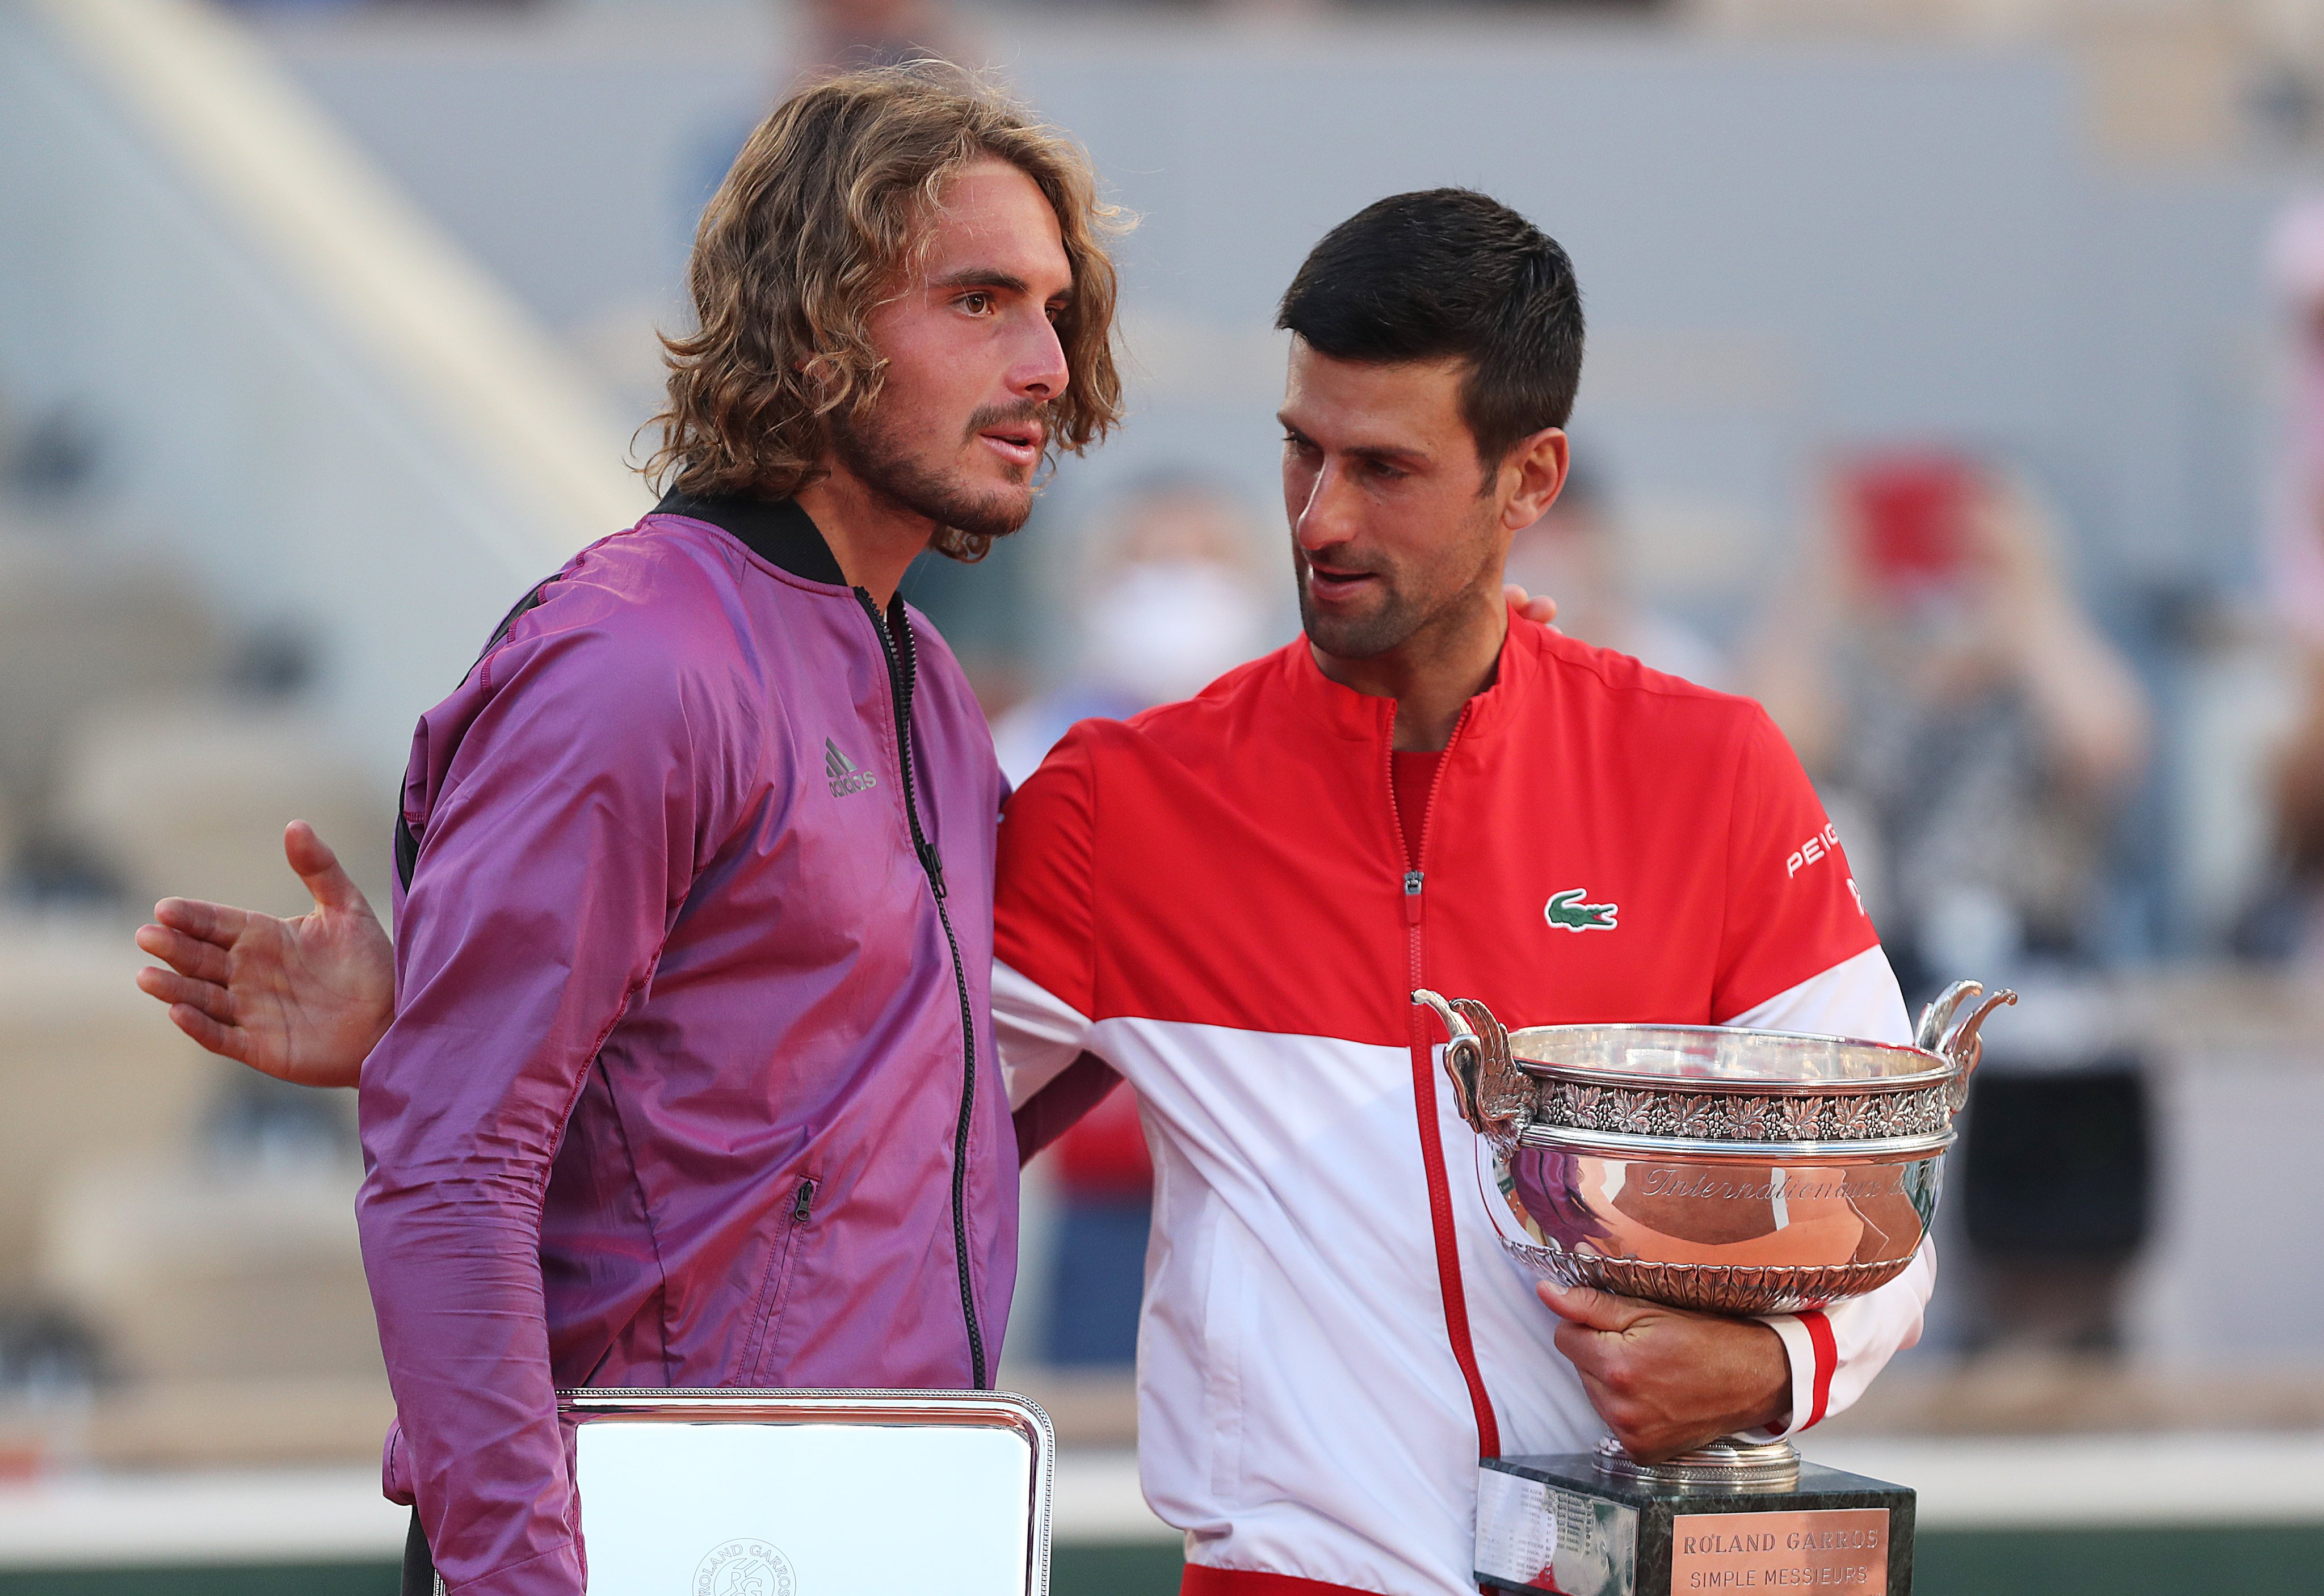 Sefanos Tsitsipas, of Greece, and Novak Djokovic, of Serbia, after the men’s singles final at the 2021 French Open. Photo: Xinhua